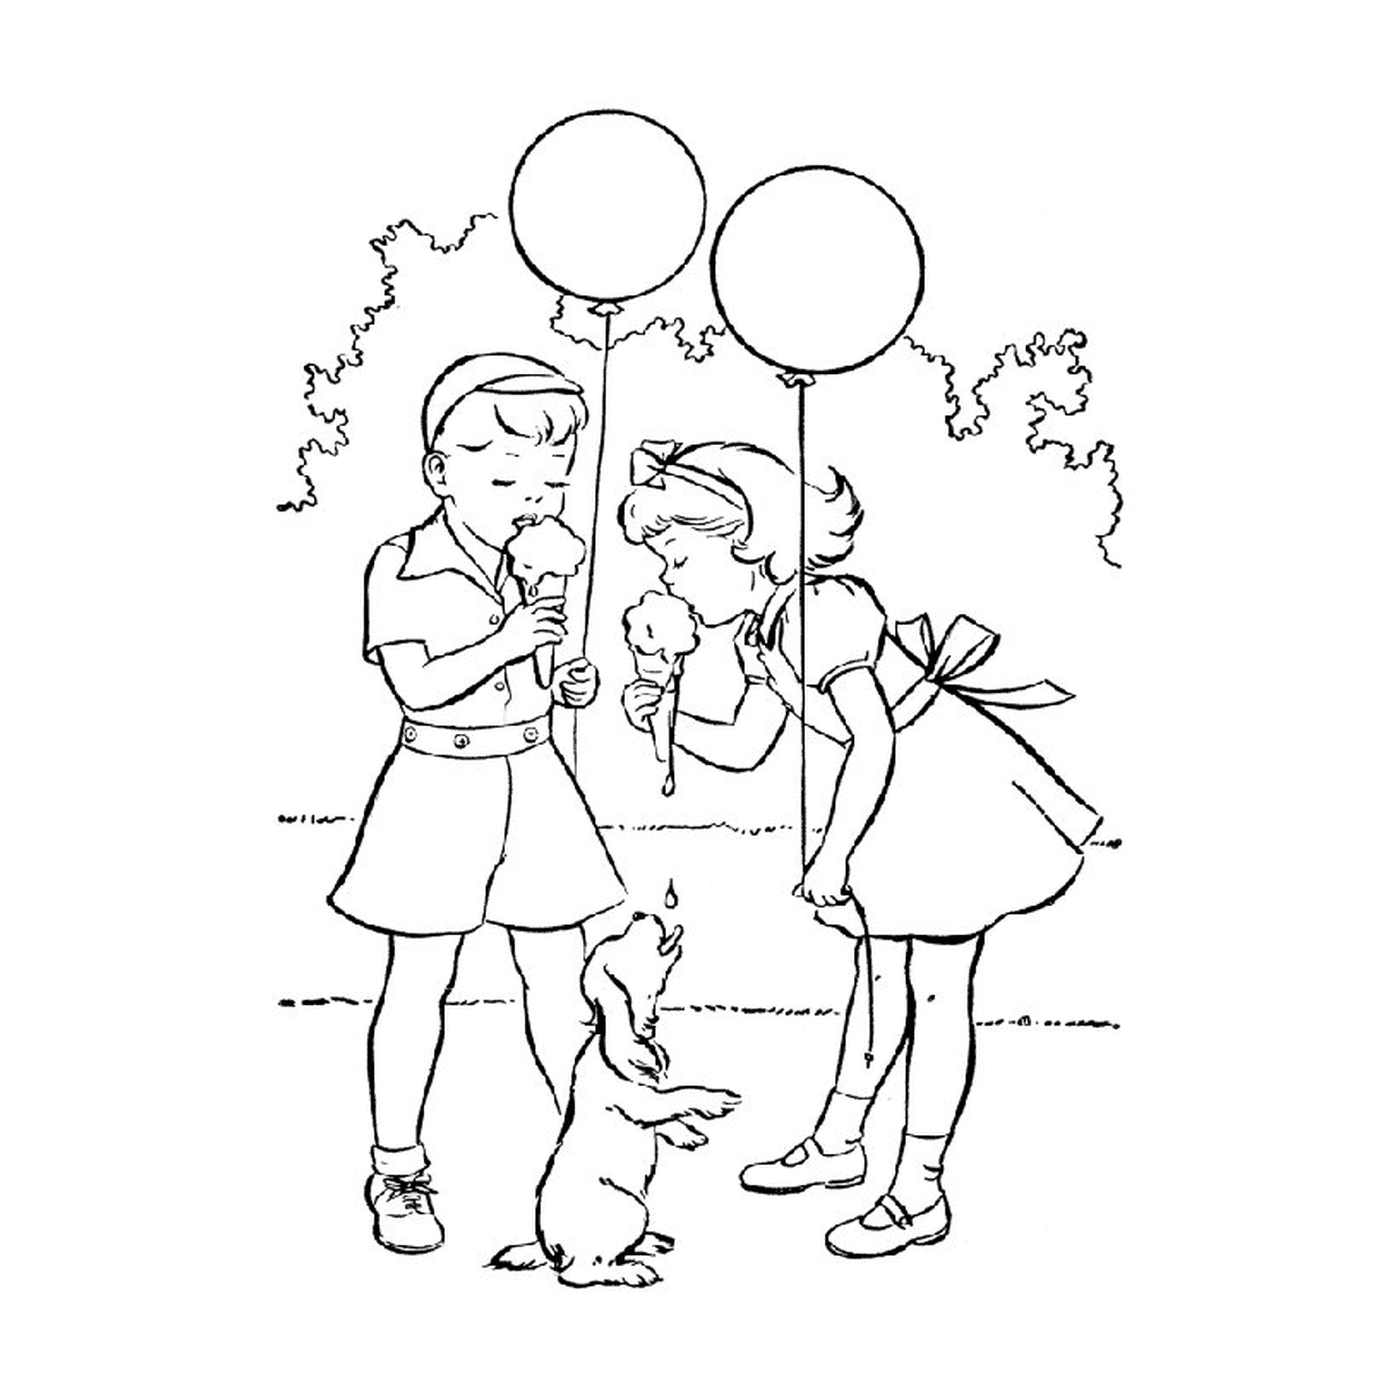  Two kids holding balloons while a cat looks 